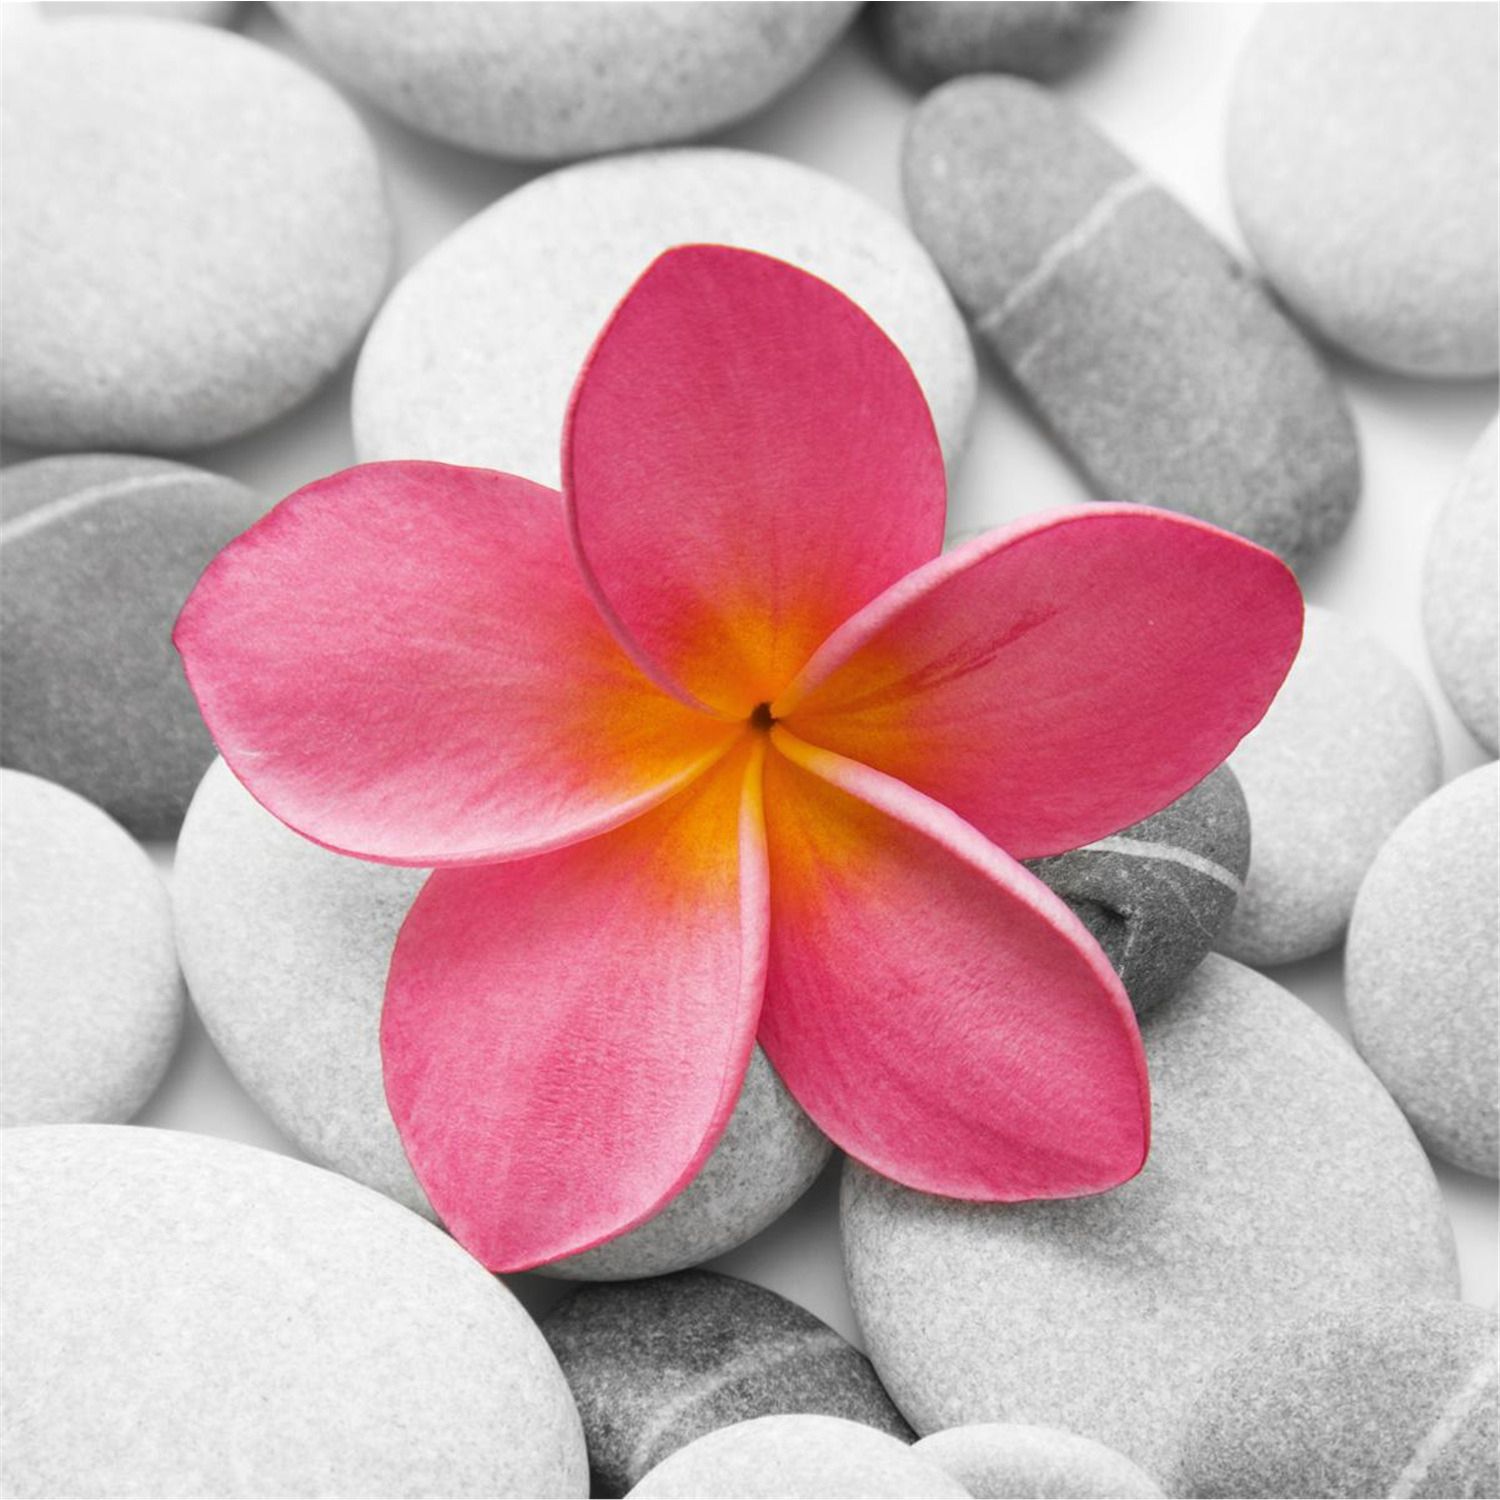 Deco Glass Wall Decor – Art On Glass – Beautiful Pink Within Most Popular Flowers Wall Art (View 19 of 20)